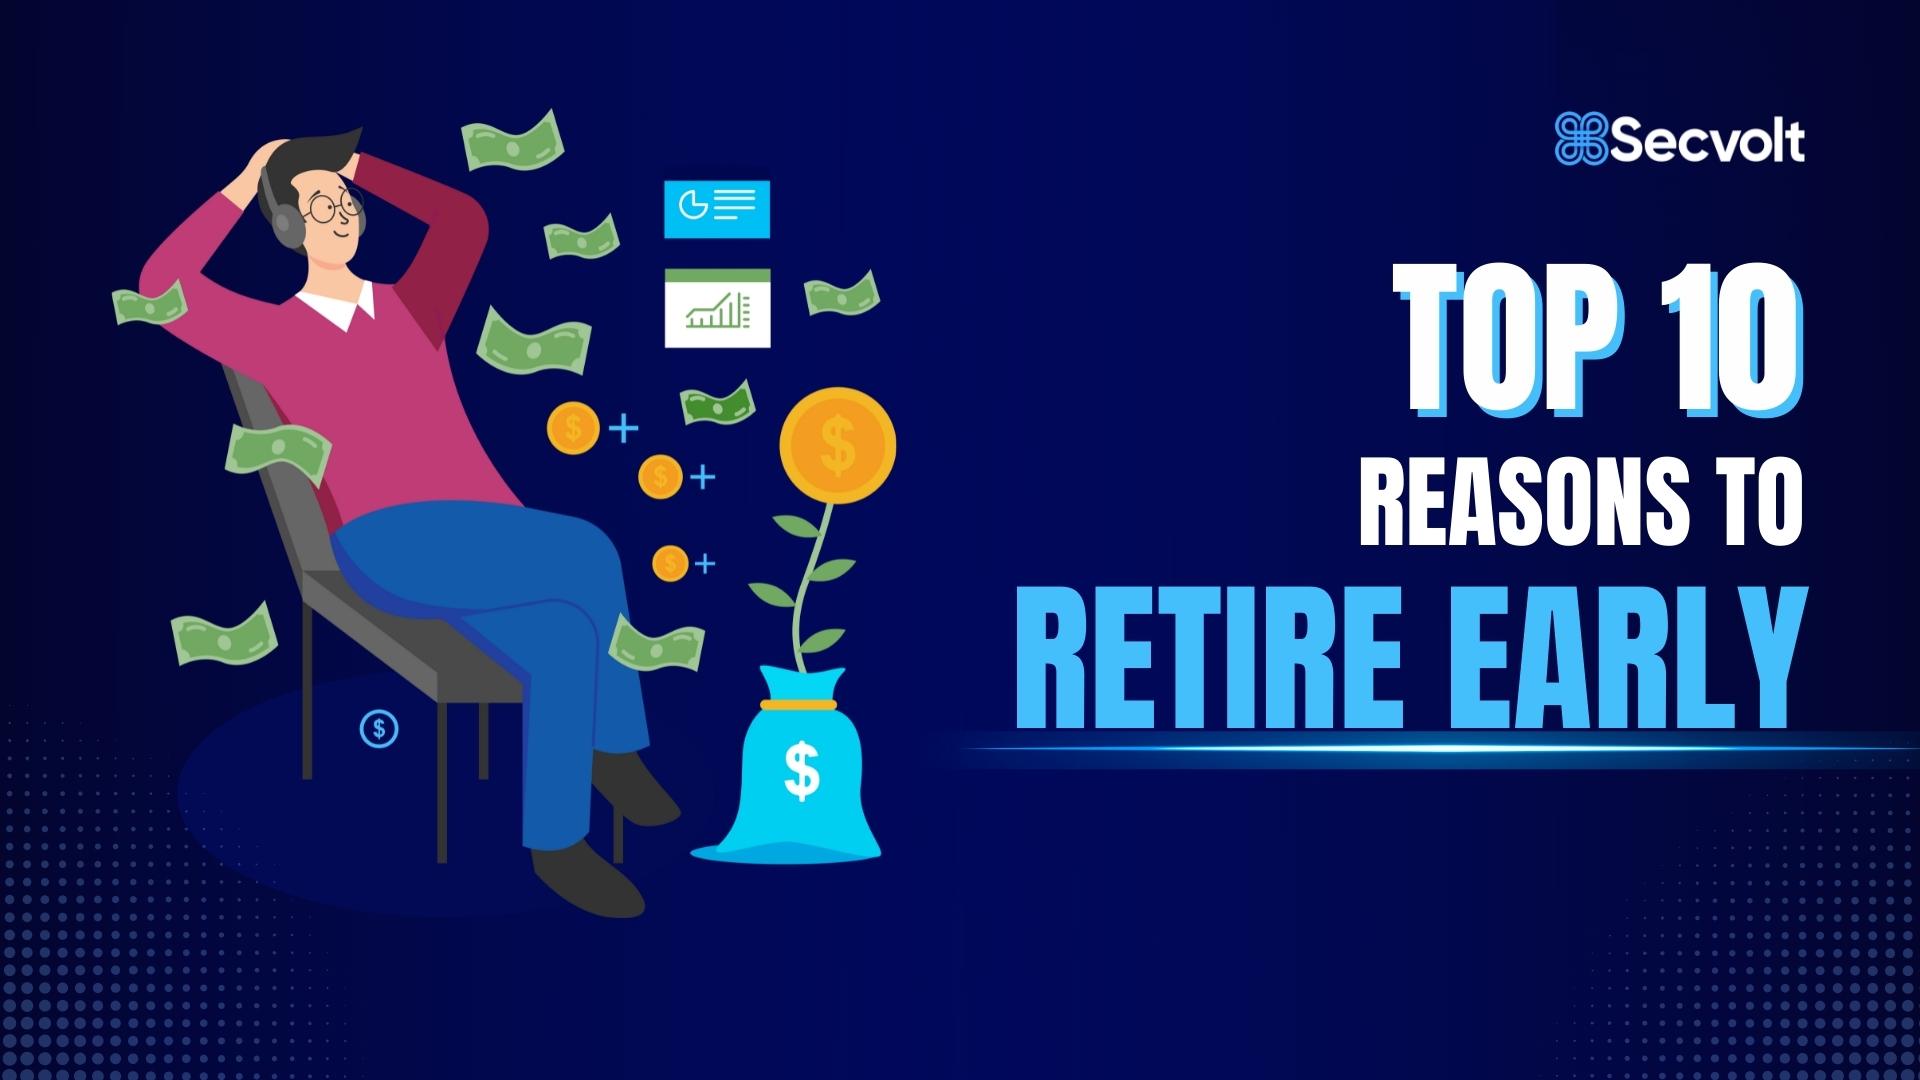 Top 10 reasons to retire early